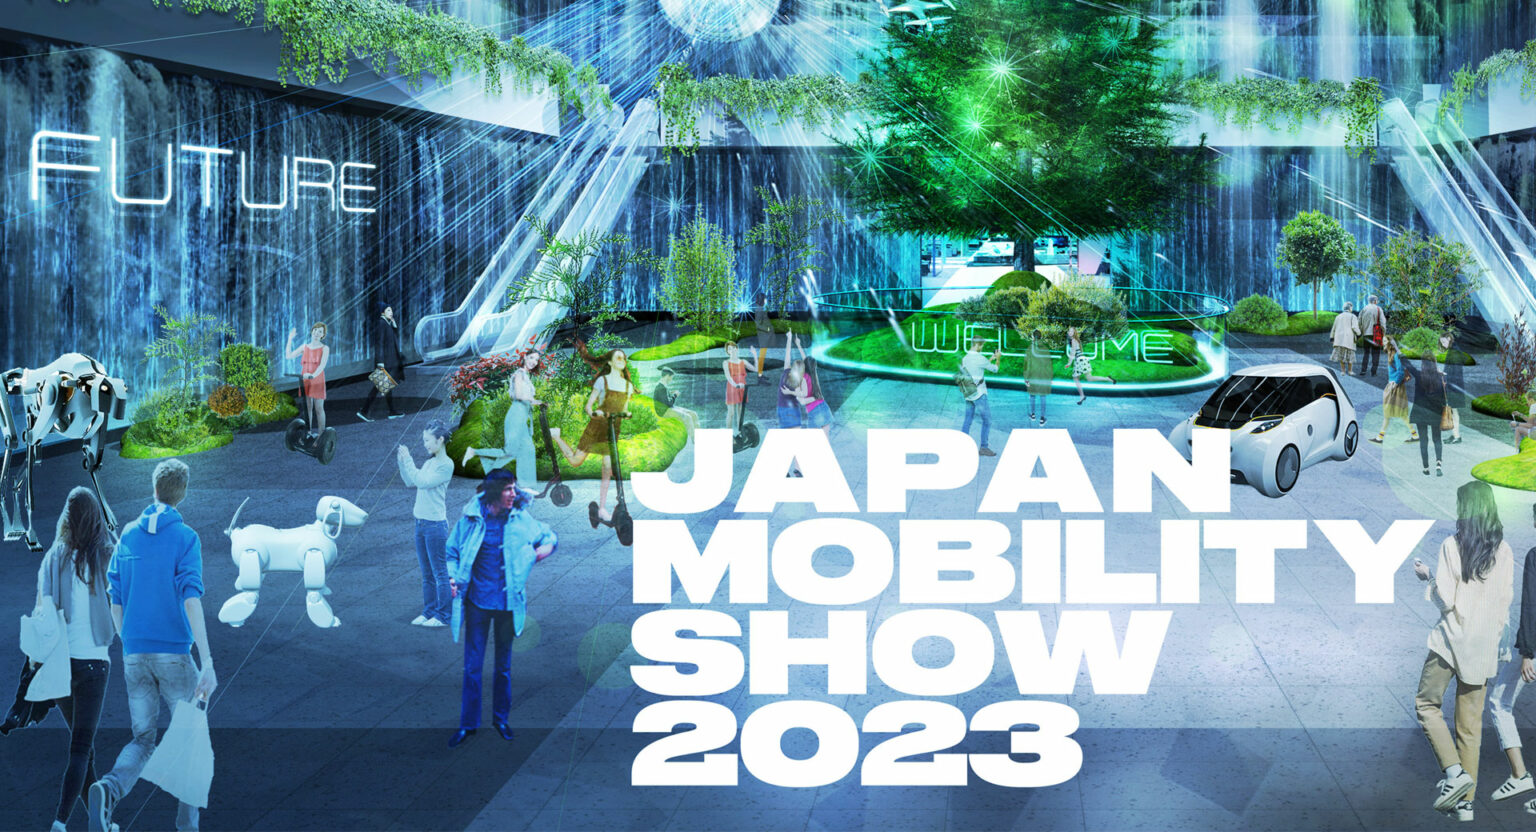 Tokyo Motor Show To Be “Redesigned” As The Japan Mobility Show, Expand